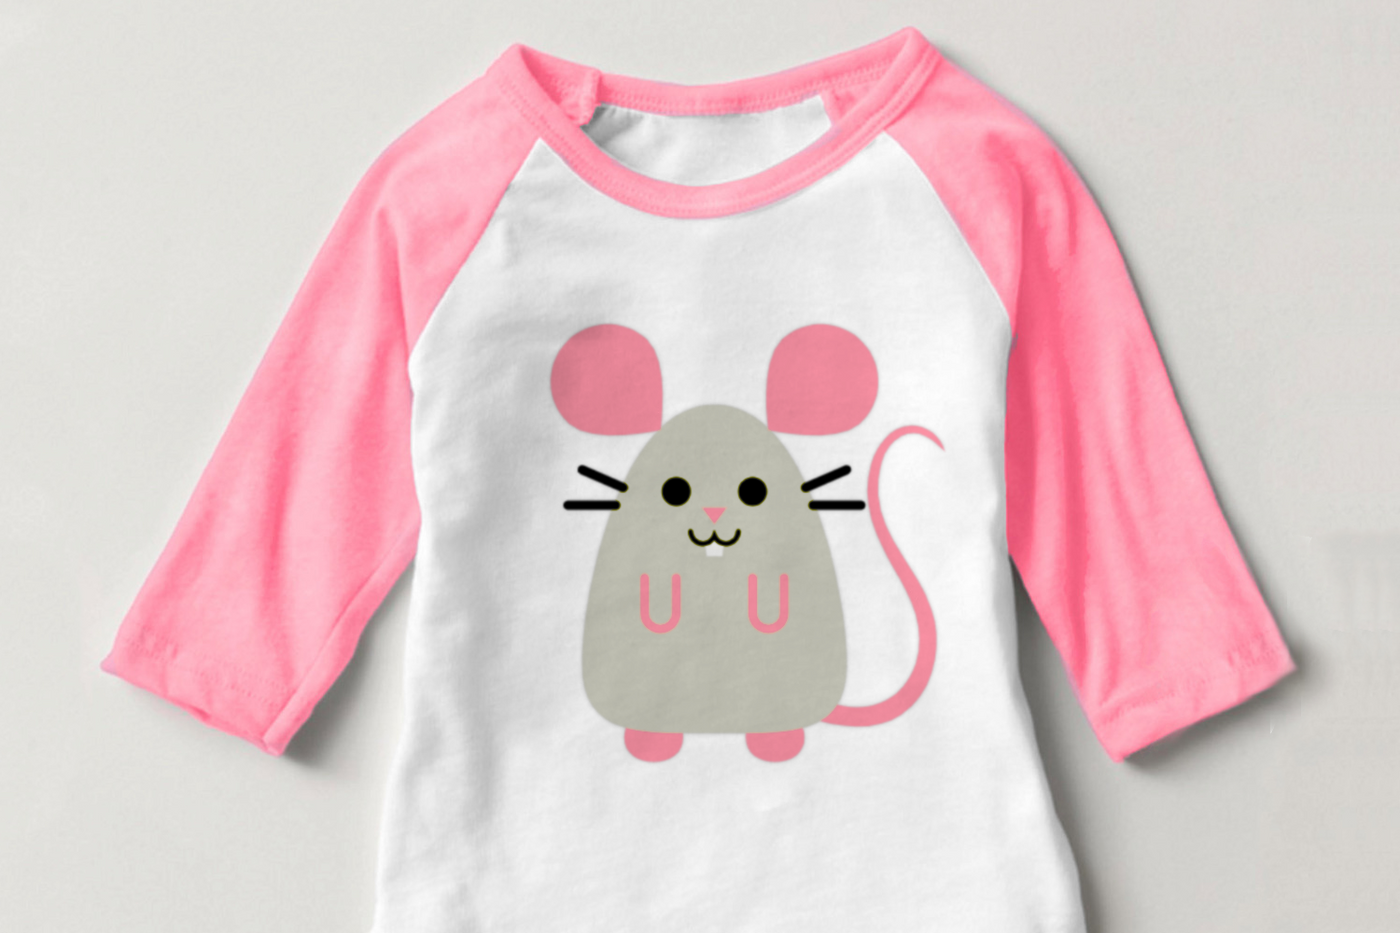 A pink and white raglan child's shirt with a cute mouse design.